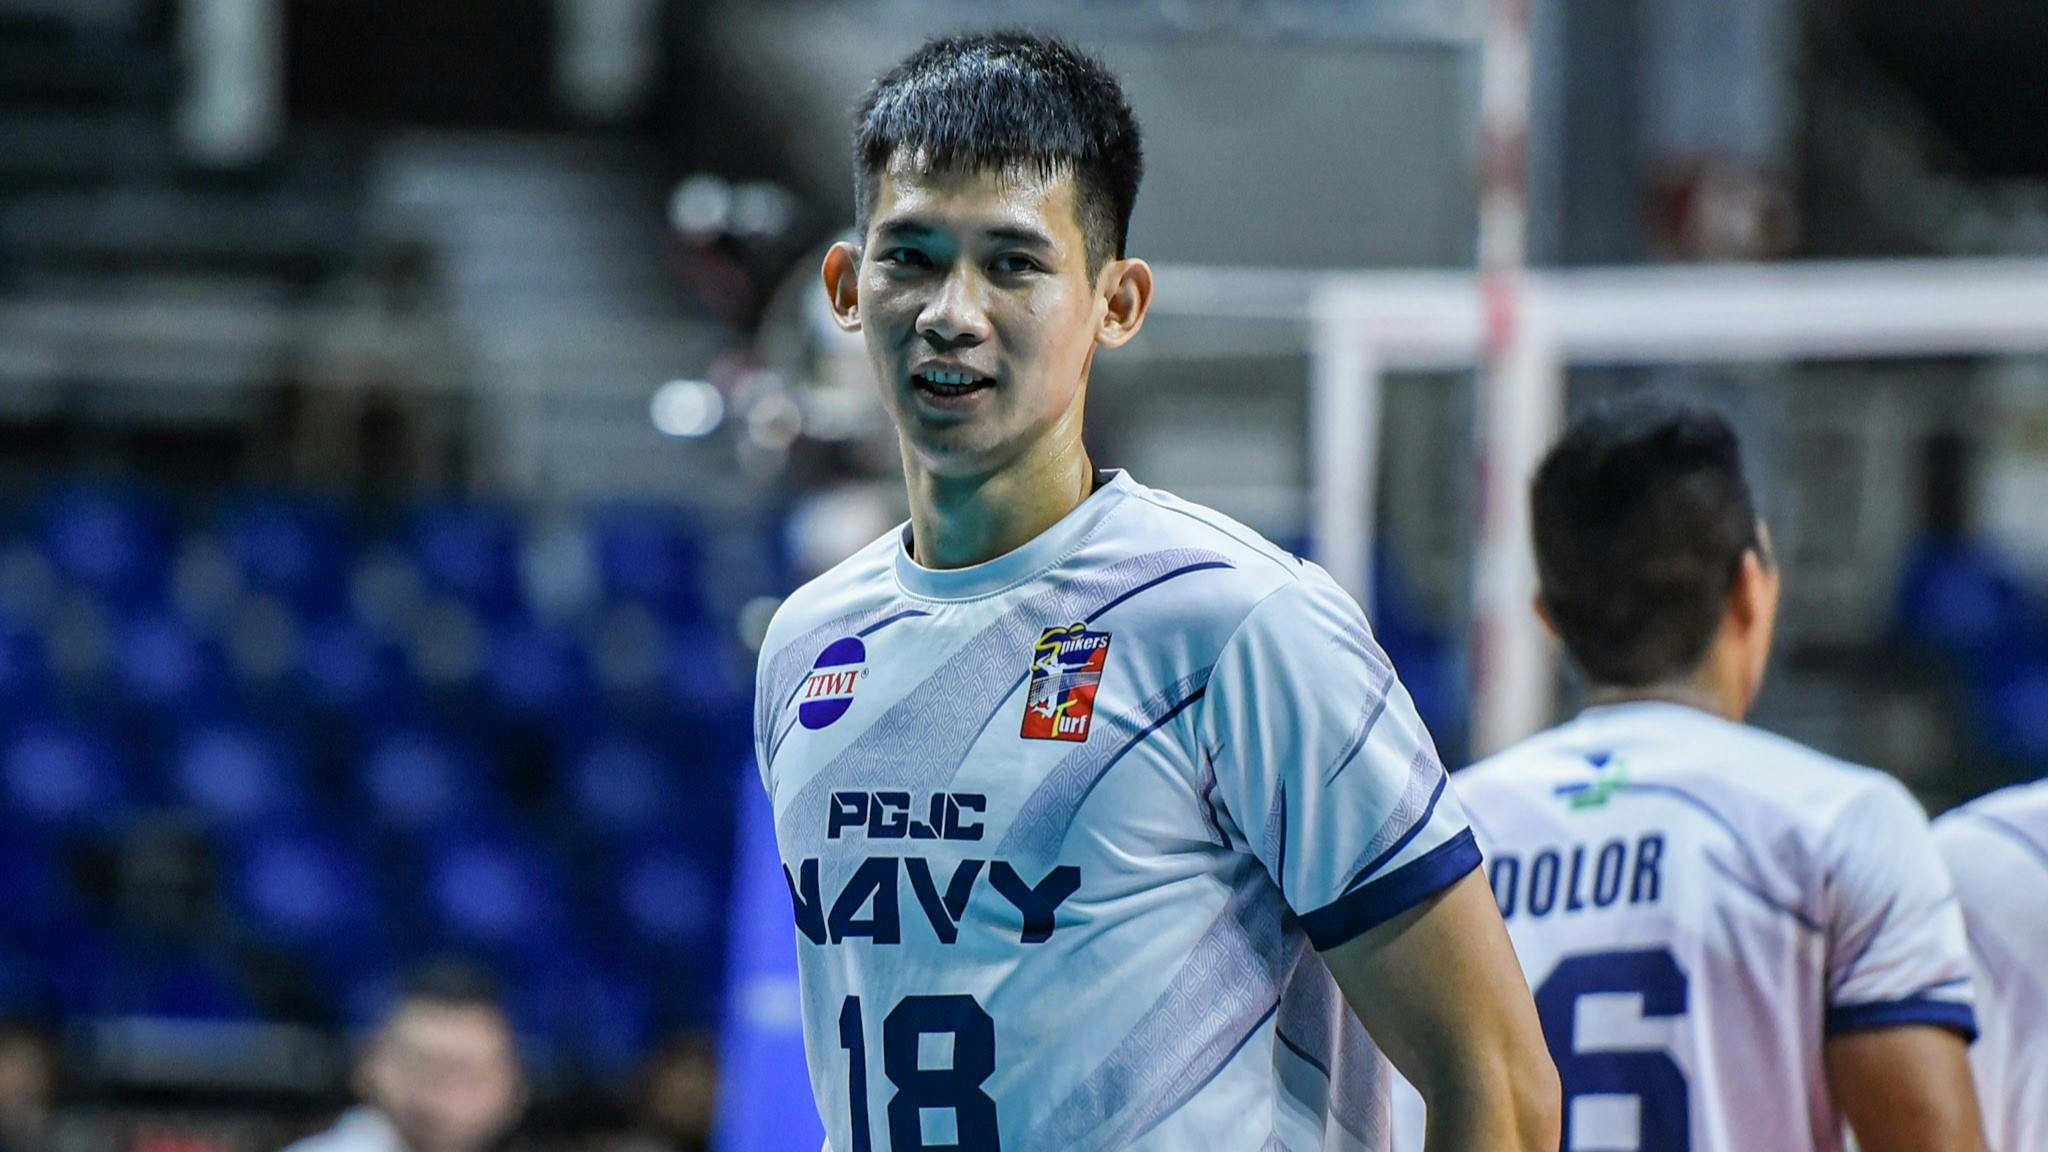 Spikers’ Turf: Joeven Dela Vega, PGJC-Navy hold off Francis-Saura less D’Navigators to close in on bronze